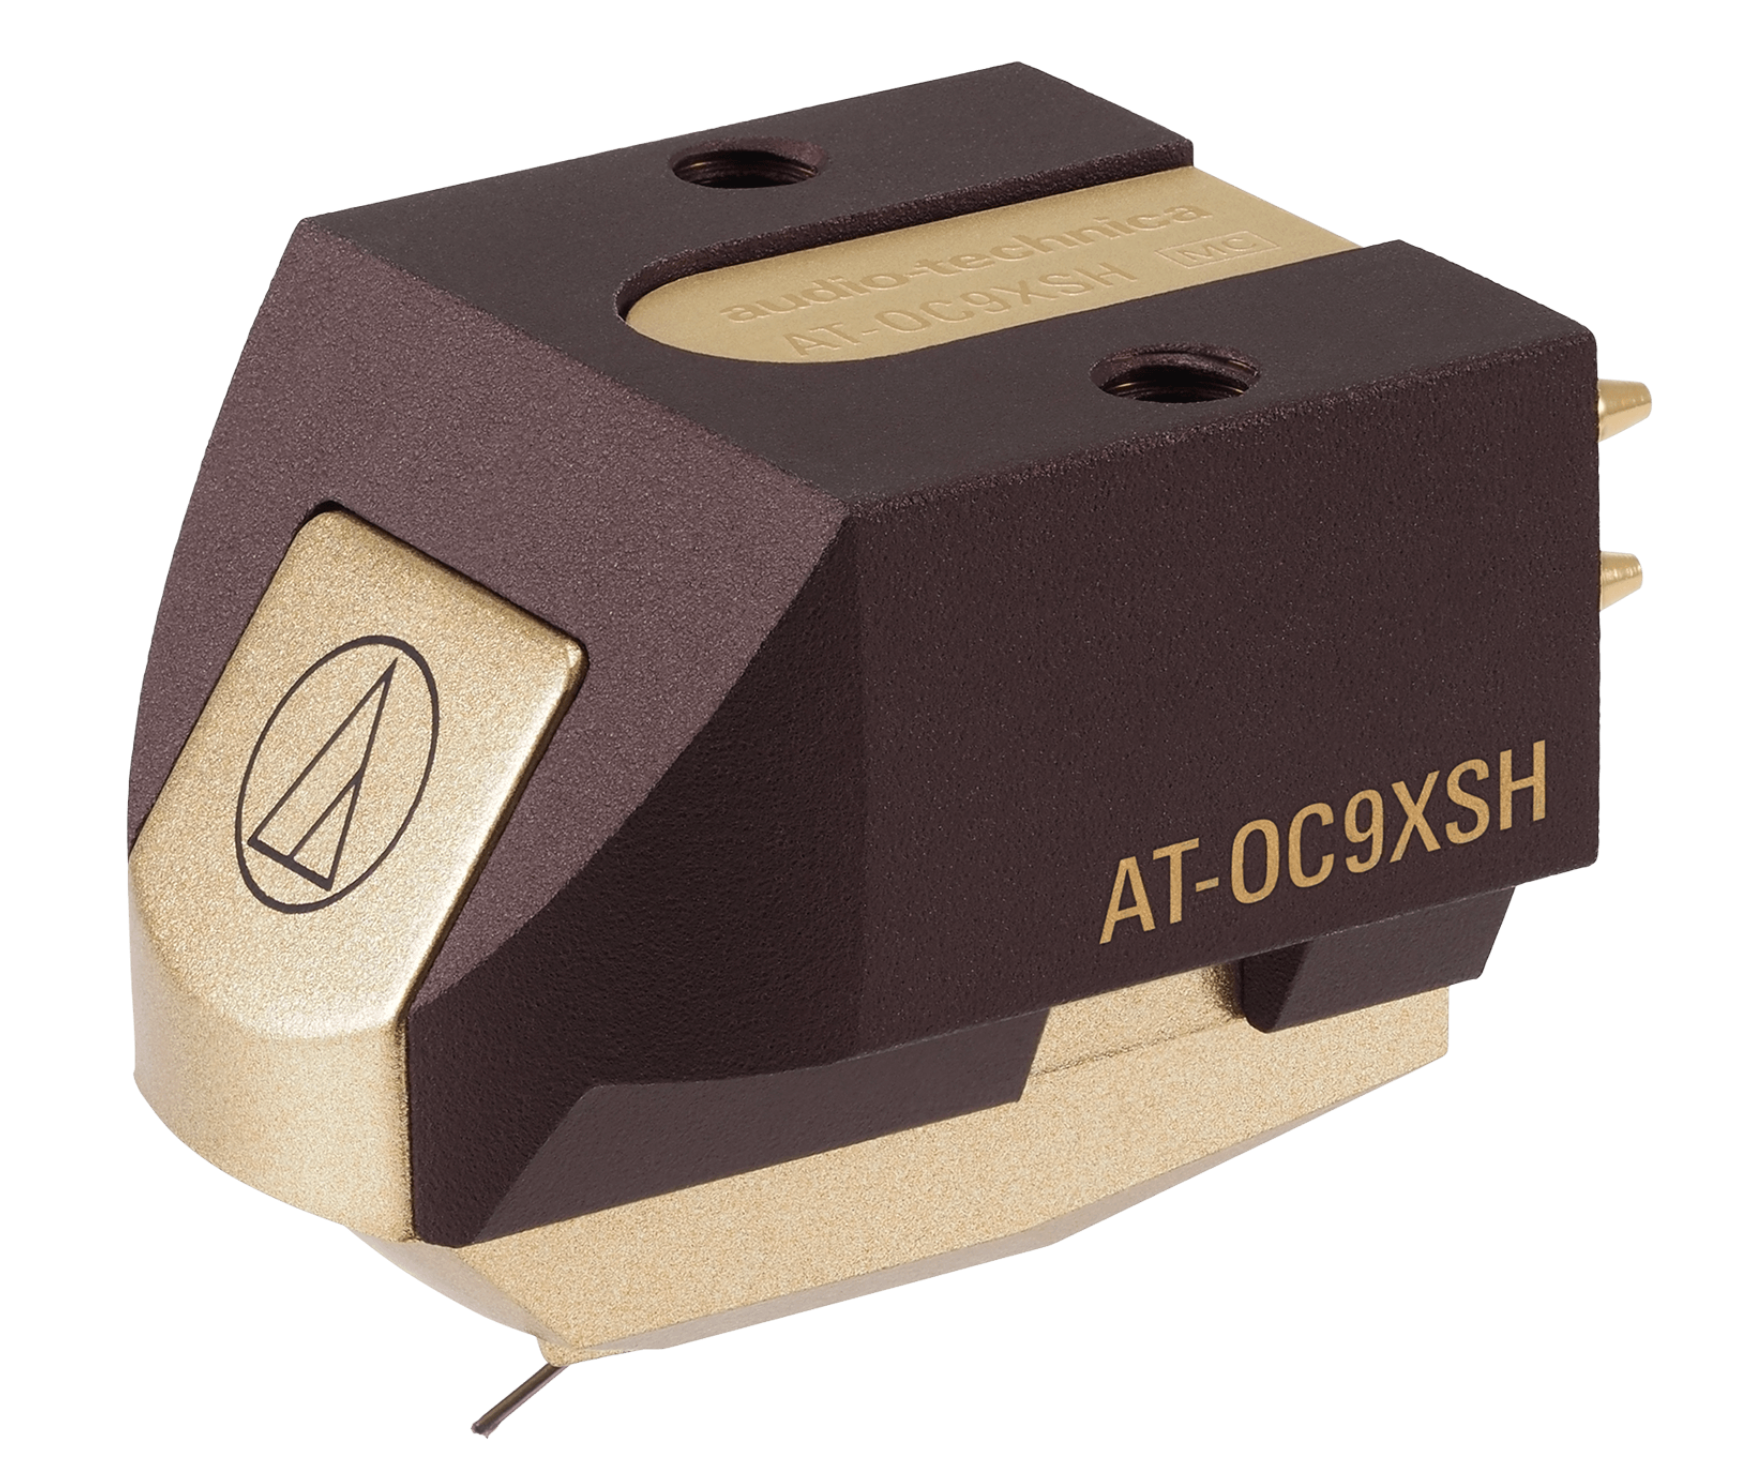 Audio Technica AT-OC9XSH Moving Coil Phono Cartridge, front and side view